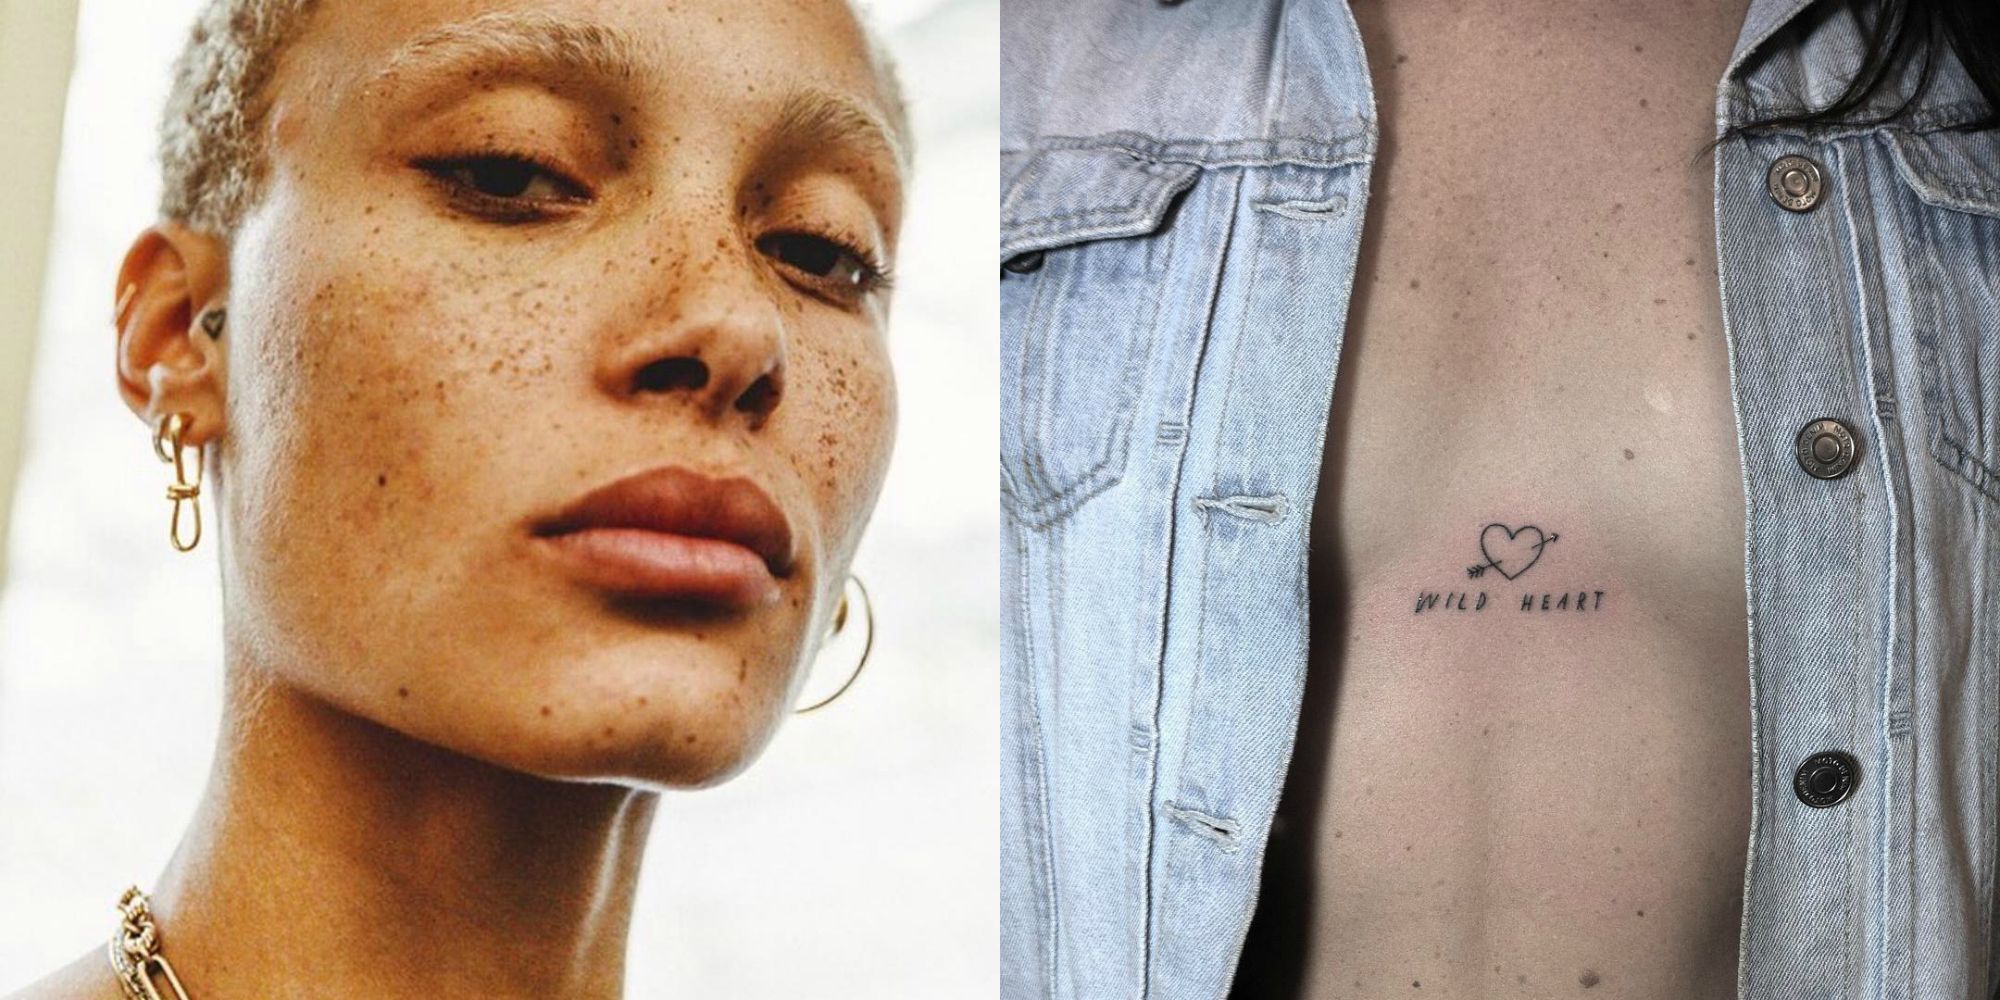 11 Heart Tattoos That'll Bring Out Your Inner Romantic